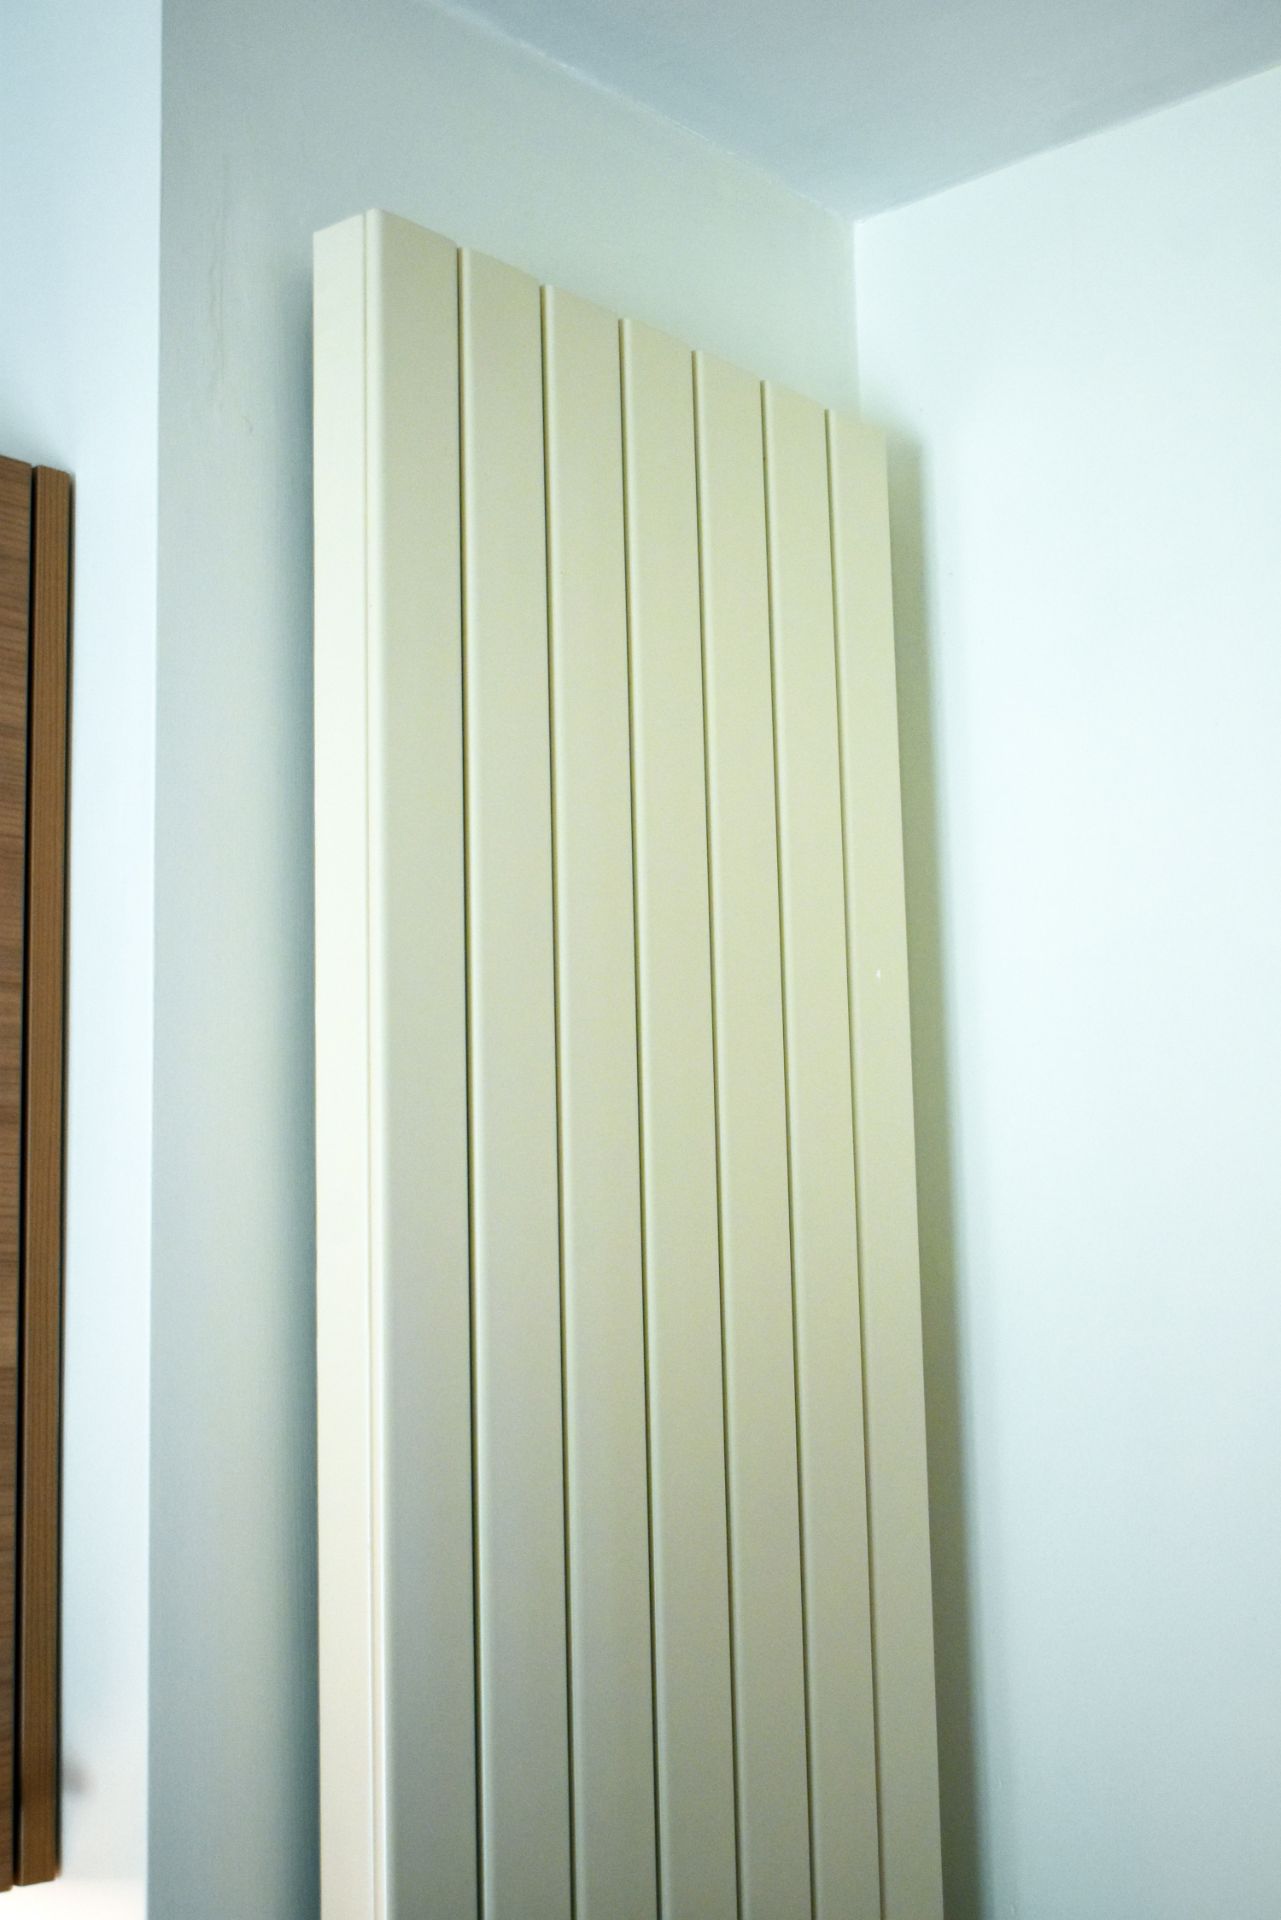 1 x Jaga Vertical Wall Panel Radiator With Vale - Cream Finish Suitable For All Interiors - H200 x - Image 3 of 9